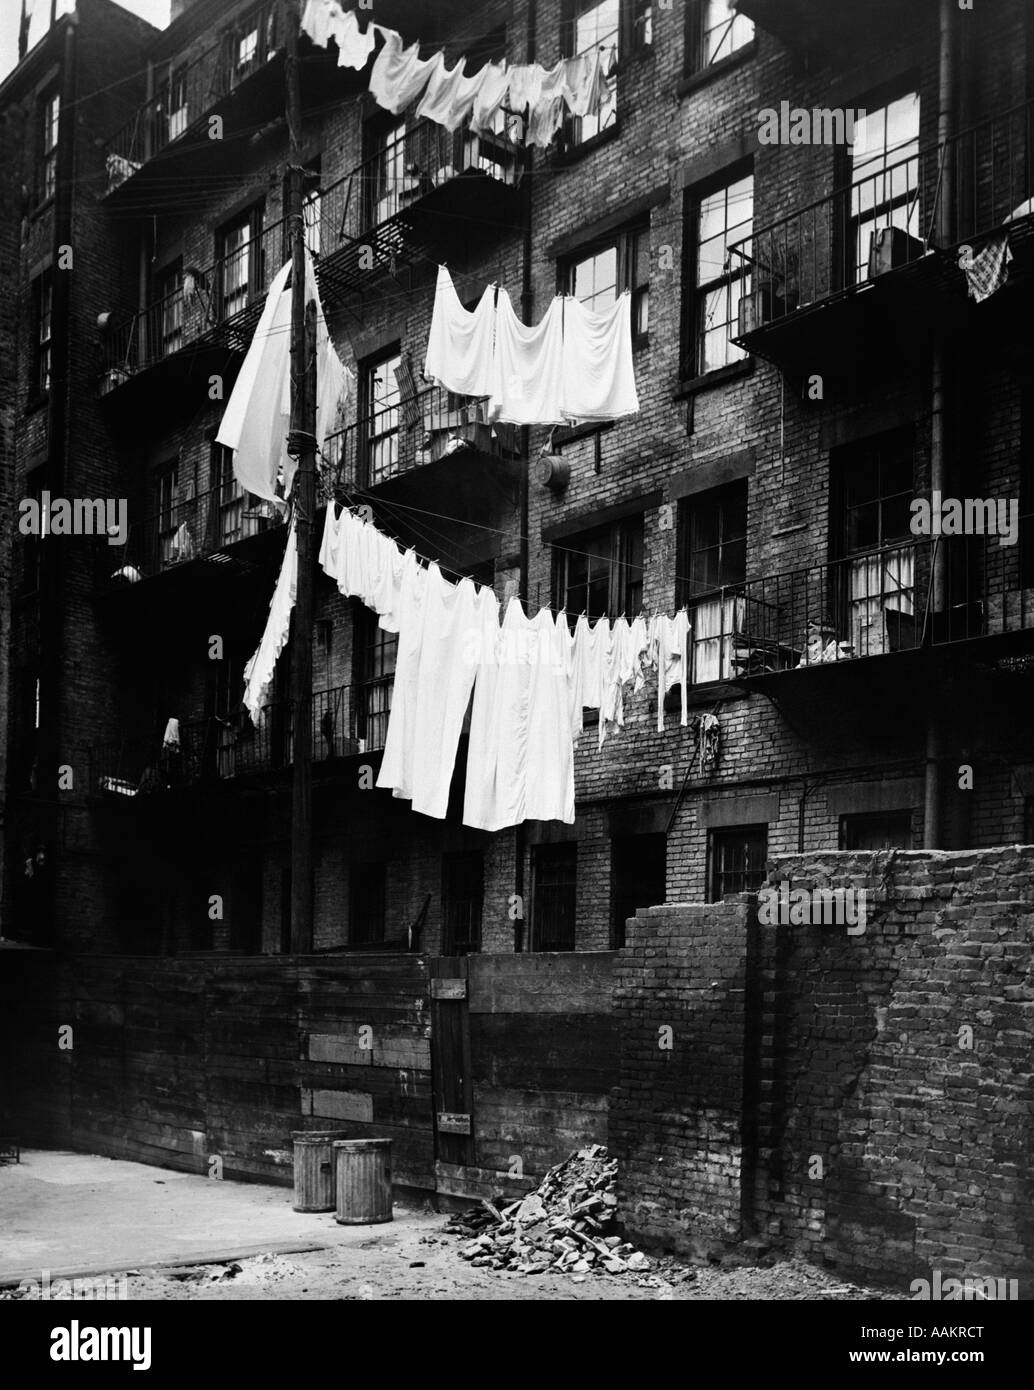 1930s TENEMENT BUILDING WITH LAUNDRY HANGING ON CLOTHESLINES I Stock Photo